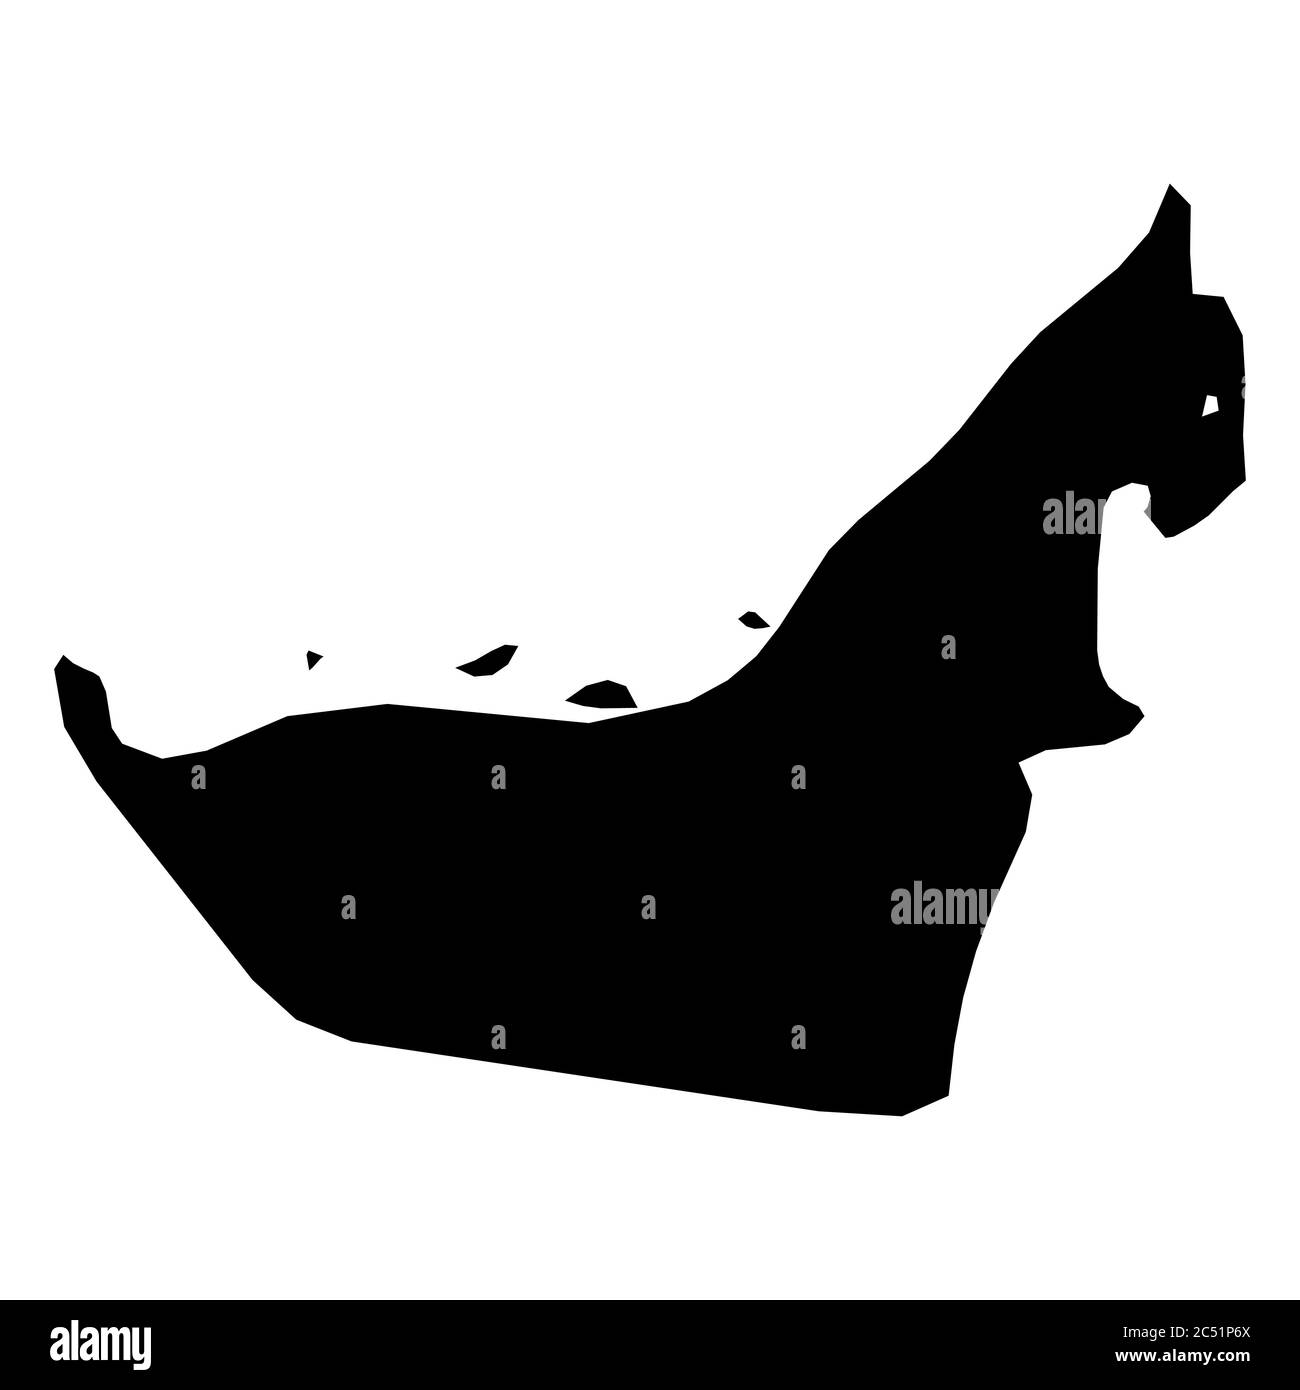 United Arab Emirates, UAE - solid black silhouette map of country area. Simple flat vector illustration. Stock Vector